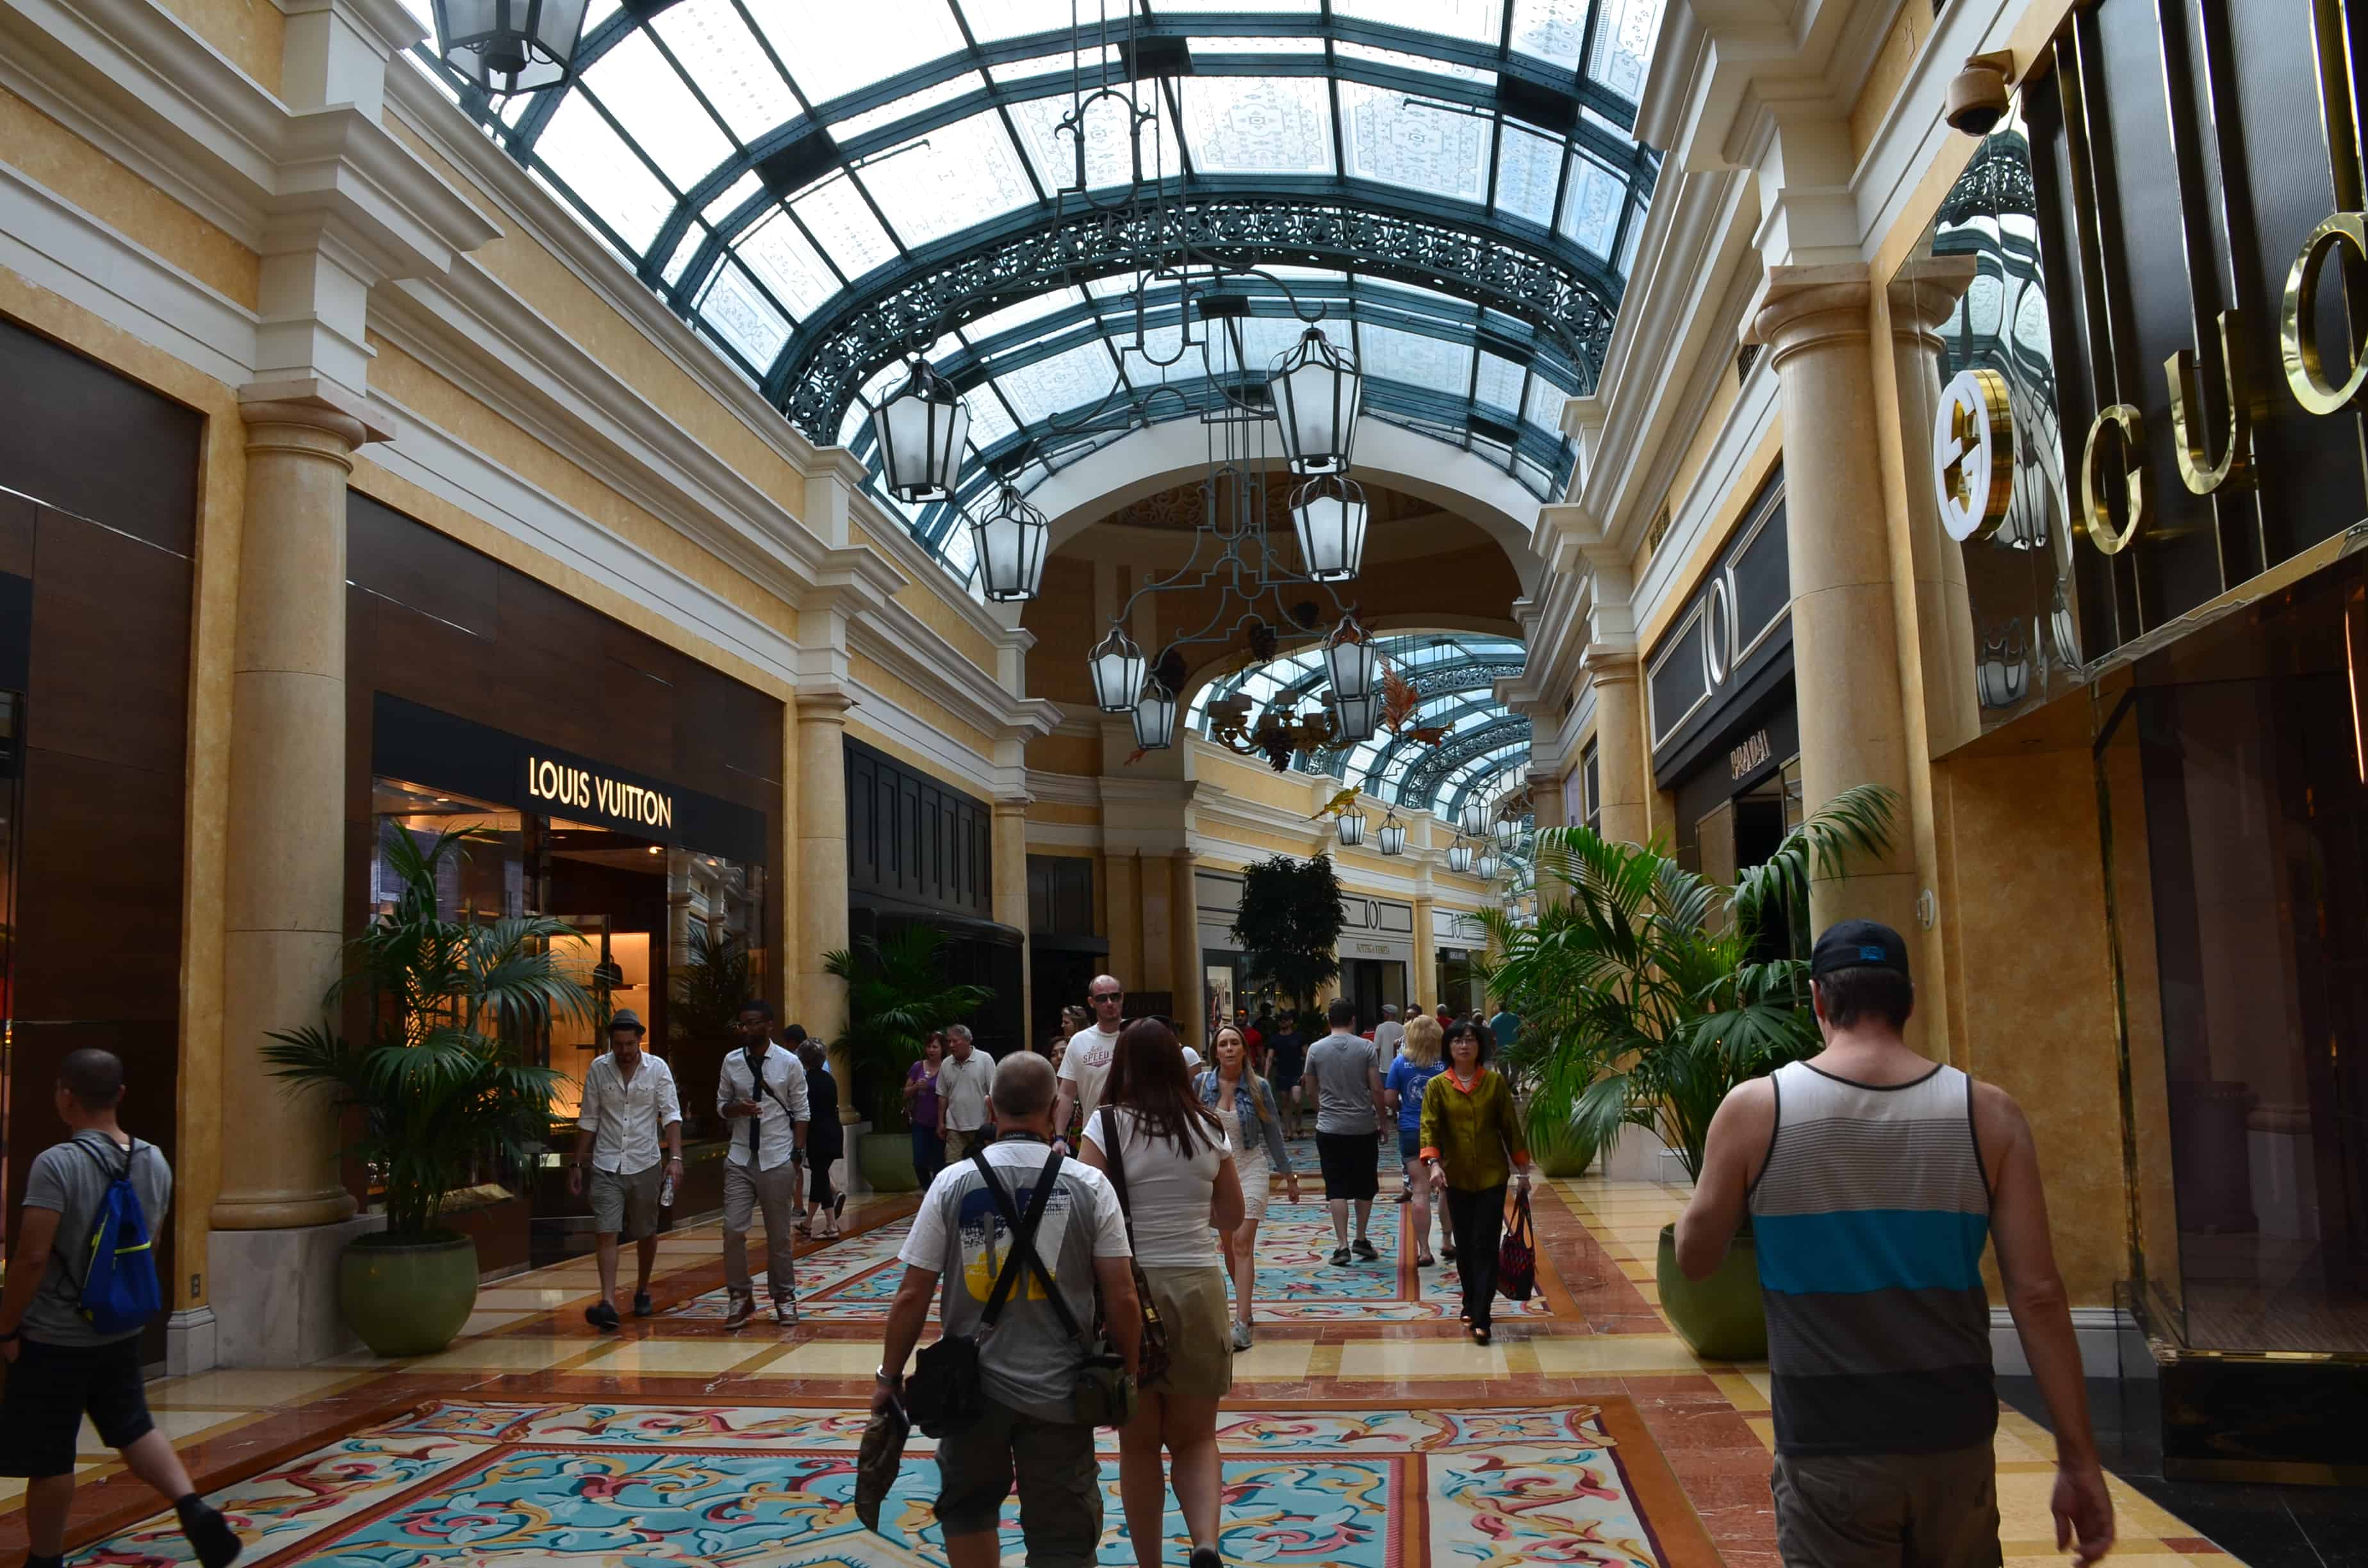 Shopping mall at the Bellagio in Las Vegas, Nevada